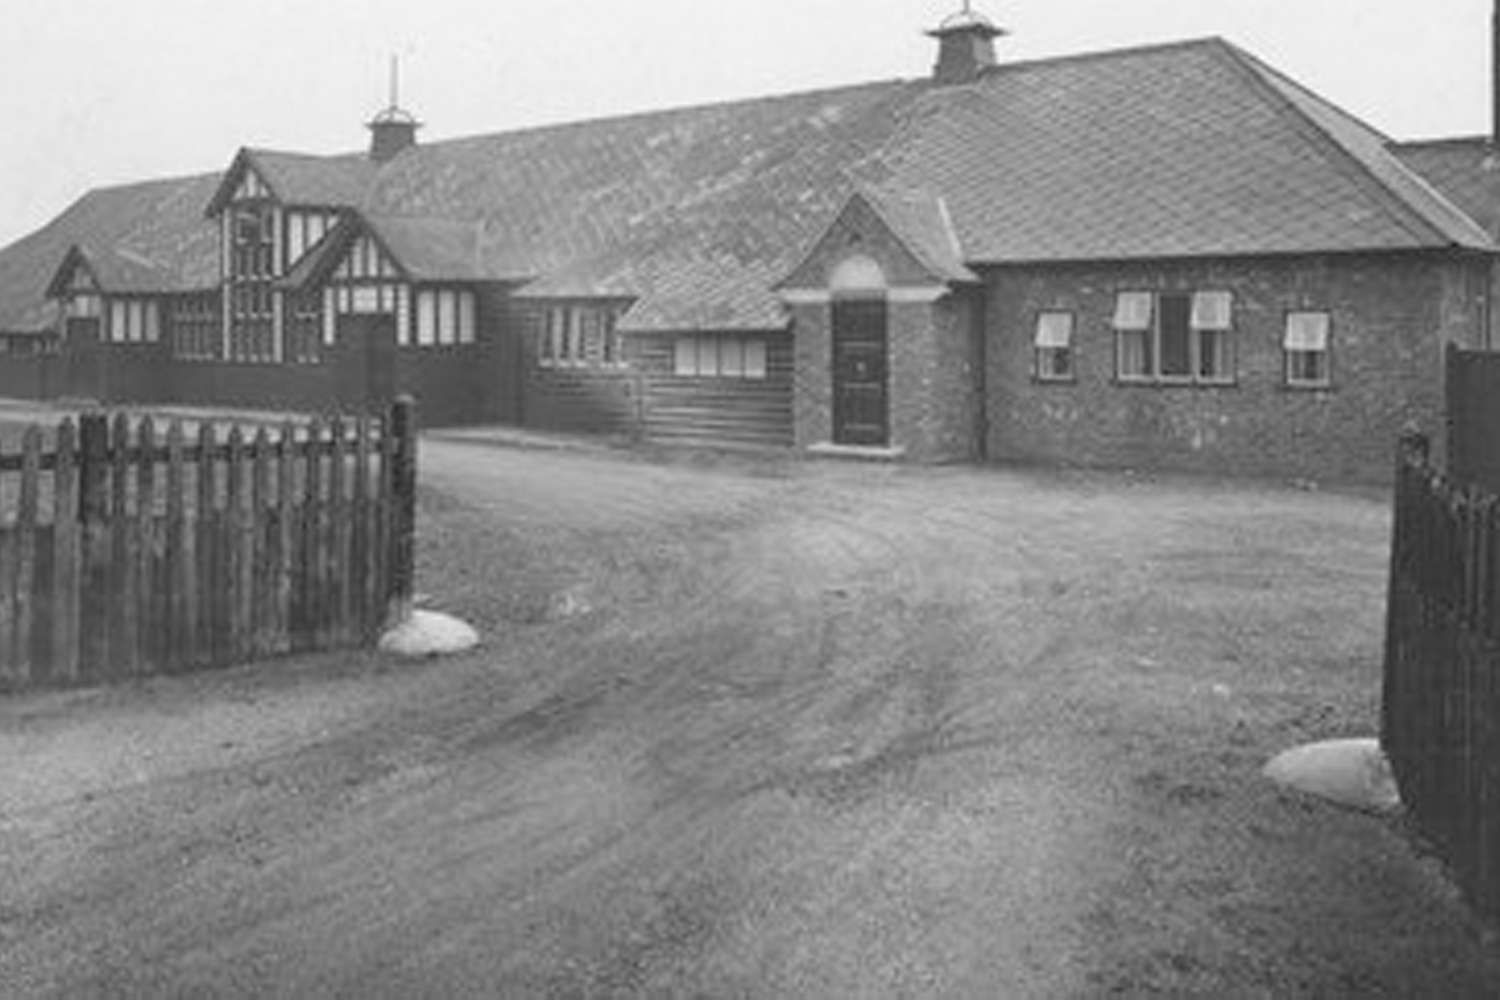 Solihull RBL - this wooden hut was our home, opposite the department store on Warwick Road. I